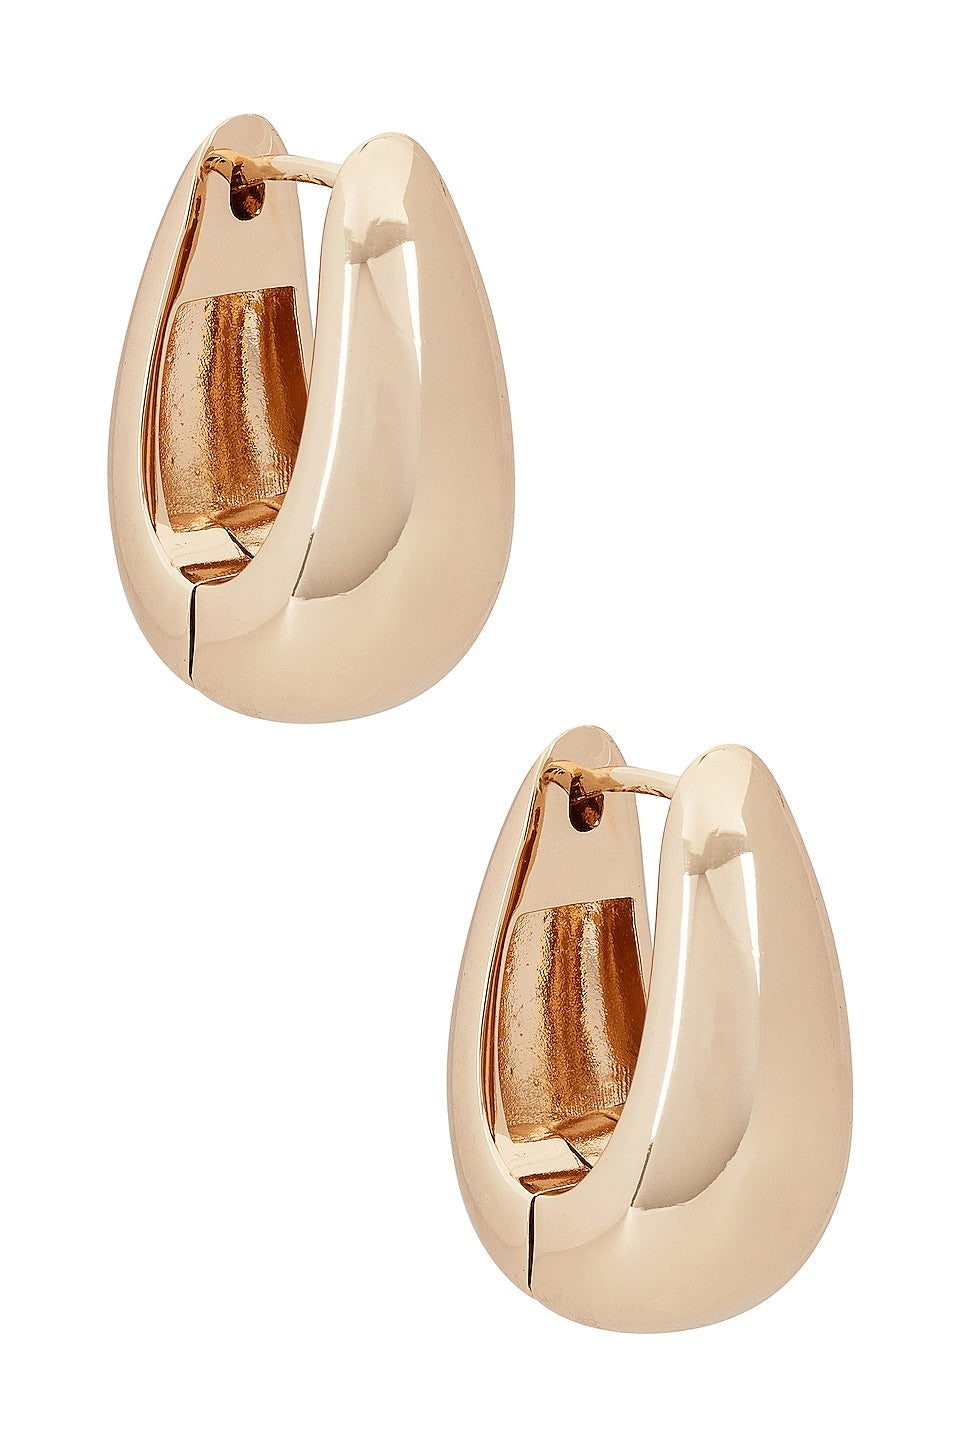 SHASHI Odyssey Hoop Earrings in Gold Size All